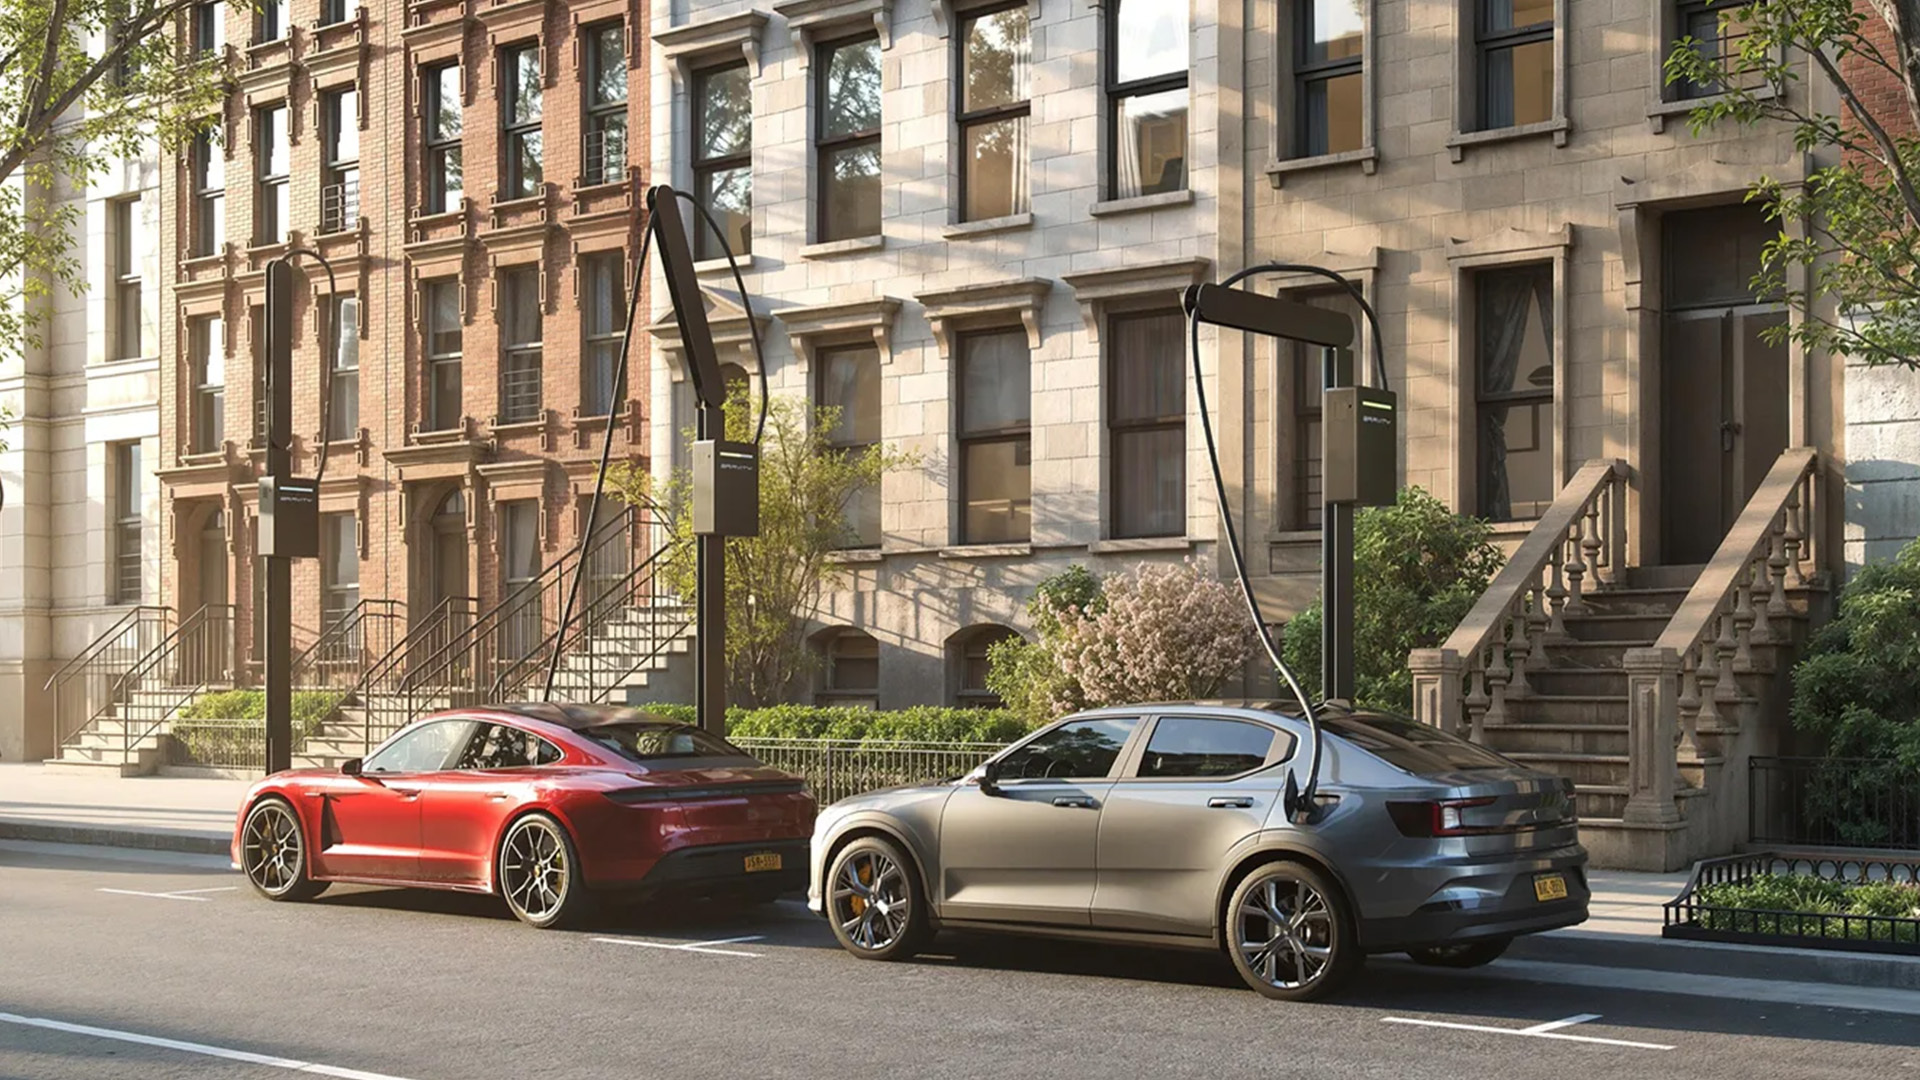 EV infrastructure startup bringing ultra-fast charging ‘trees’ to New York City